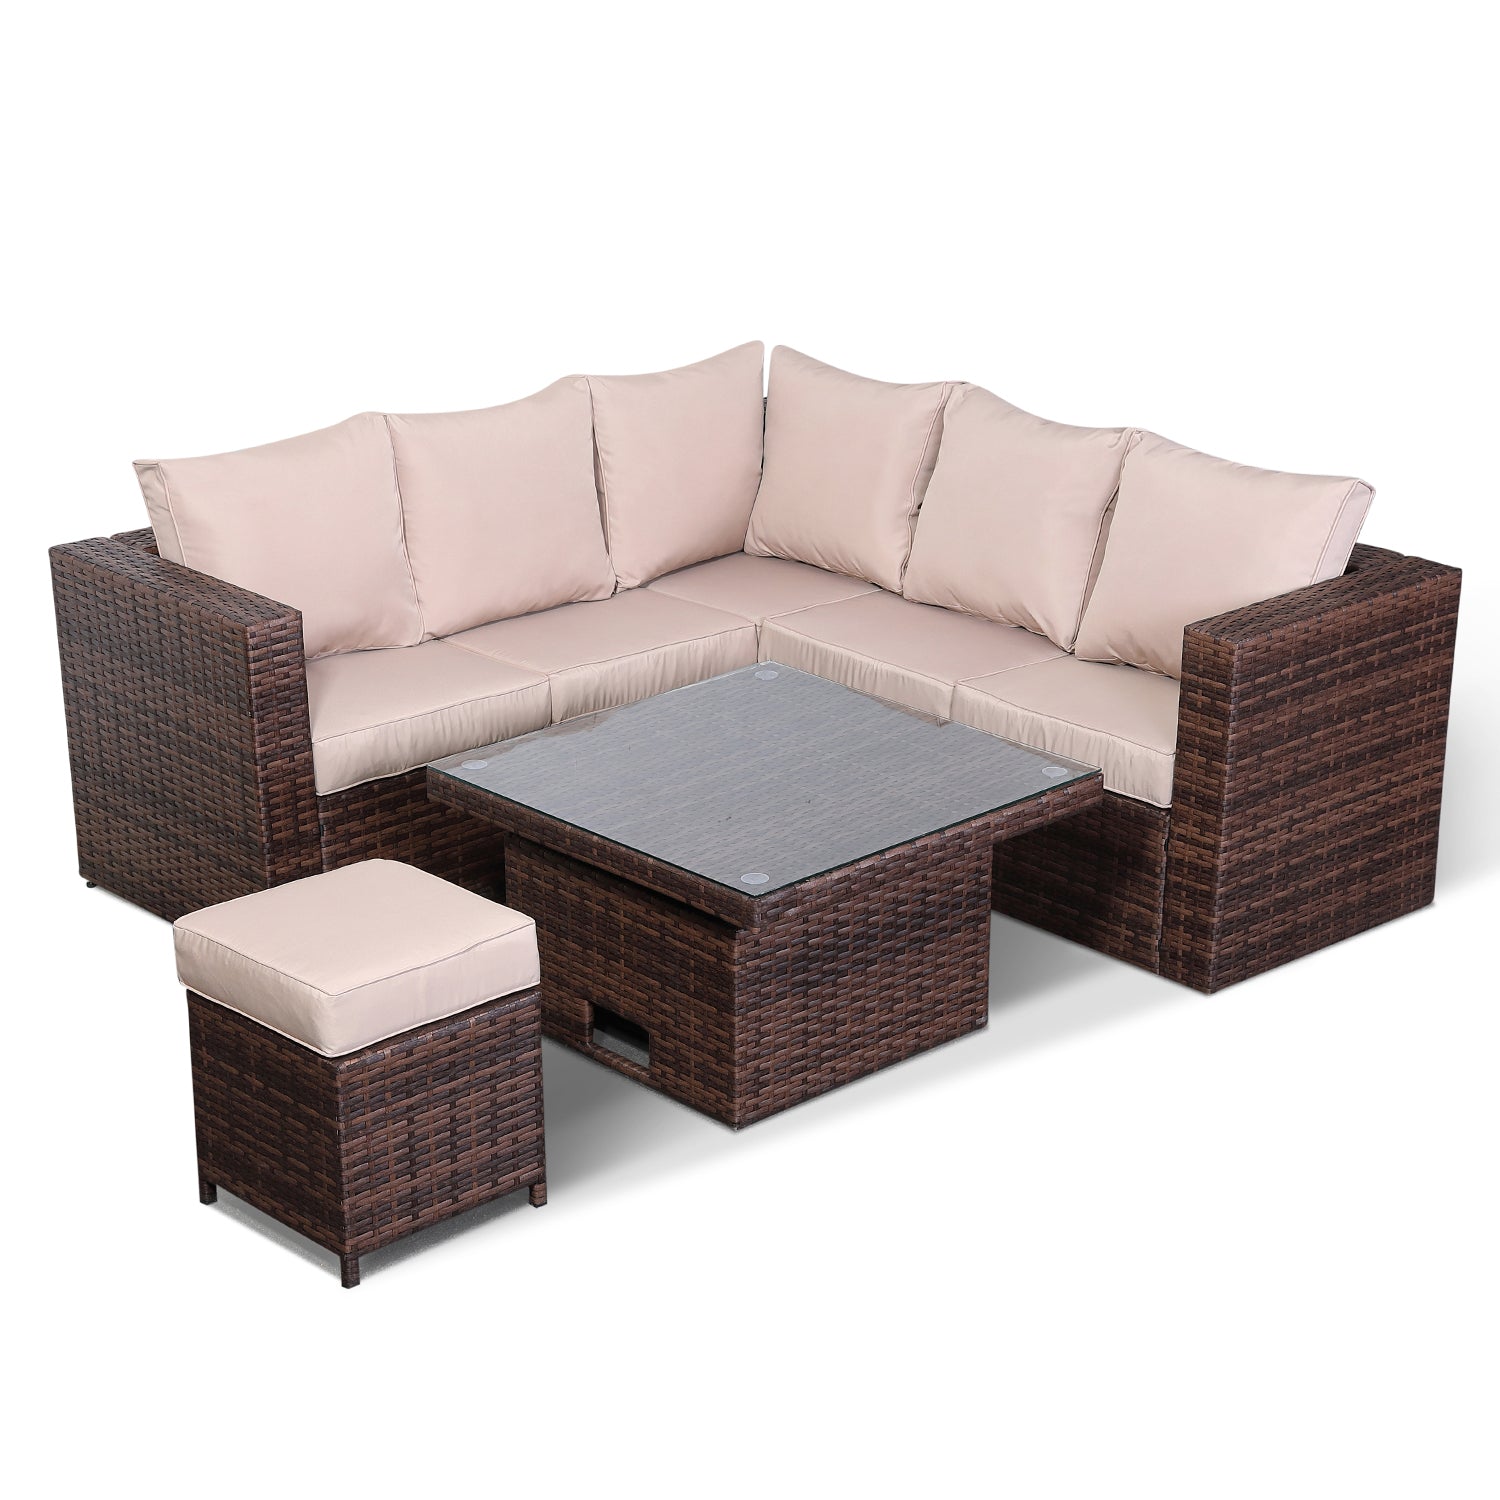 Lily Range Small Dining Corner Sofa Set with Rising Table In Brown